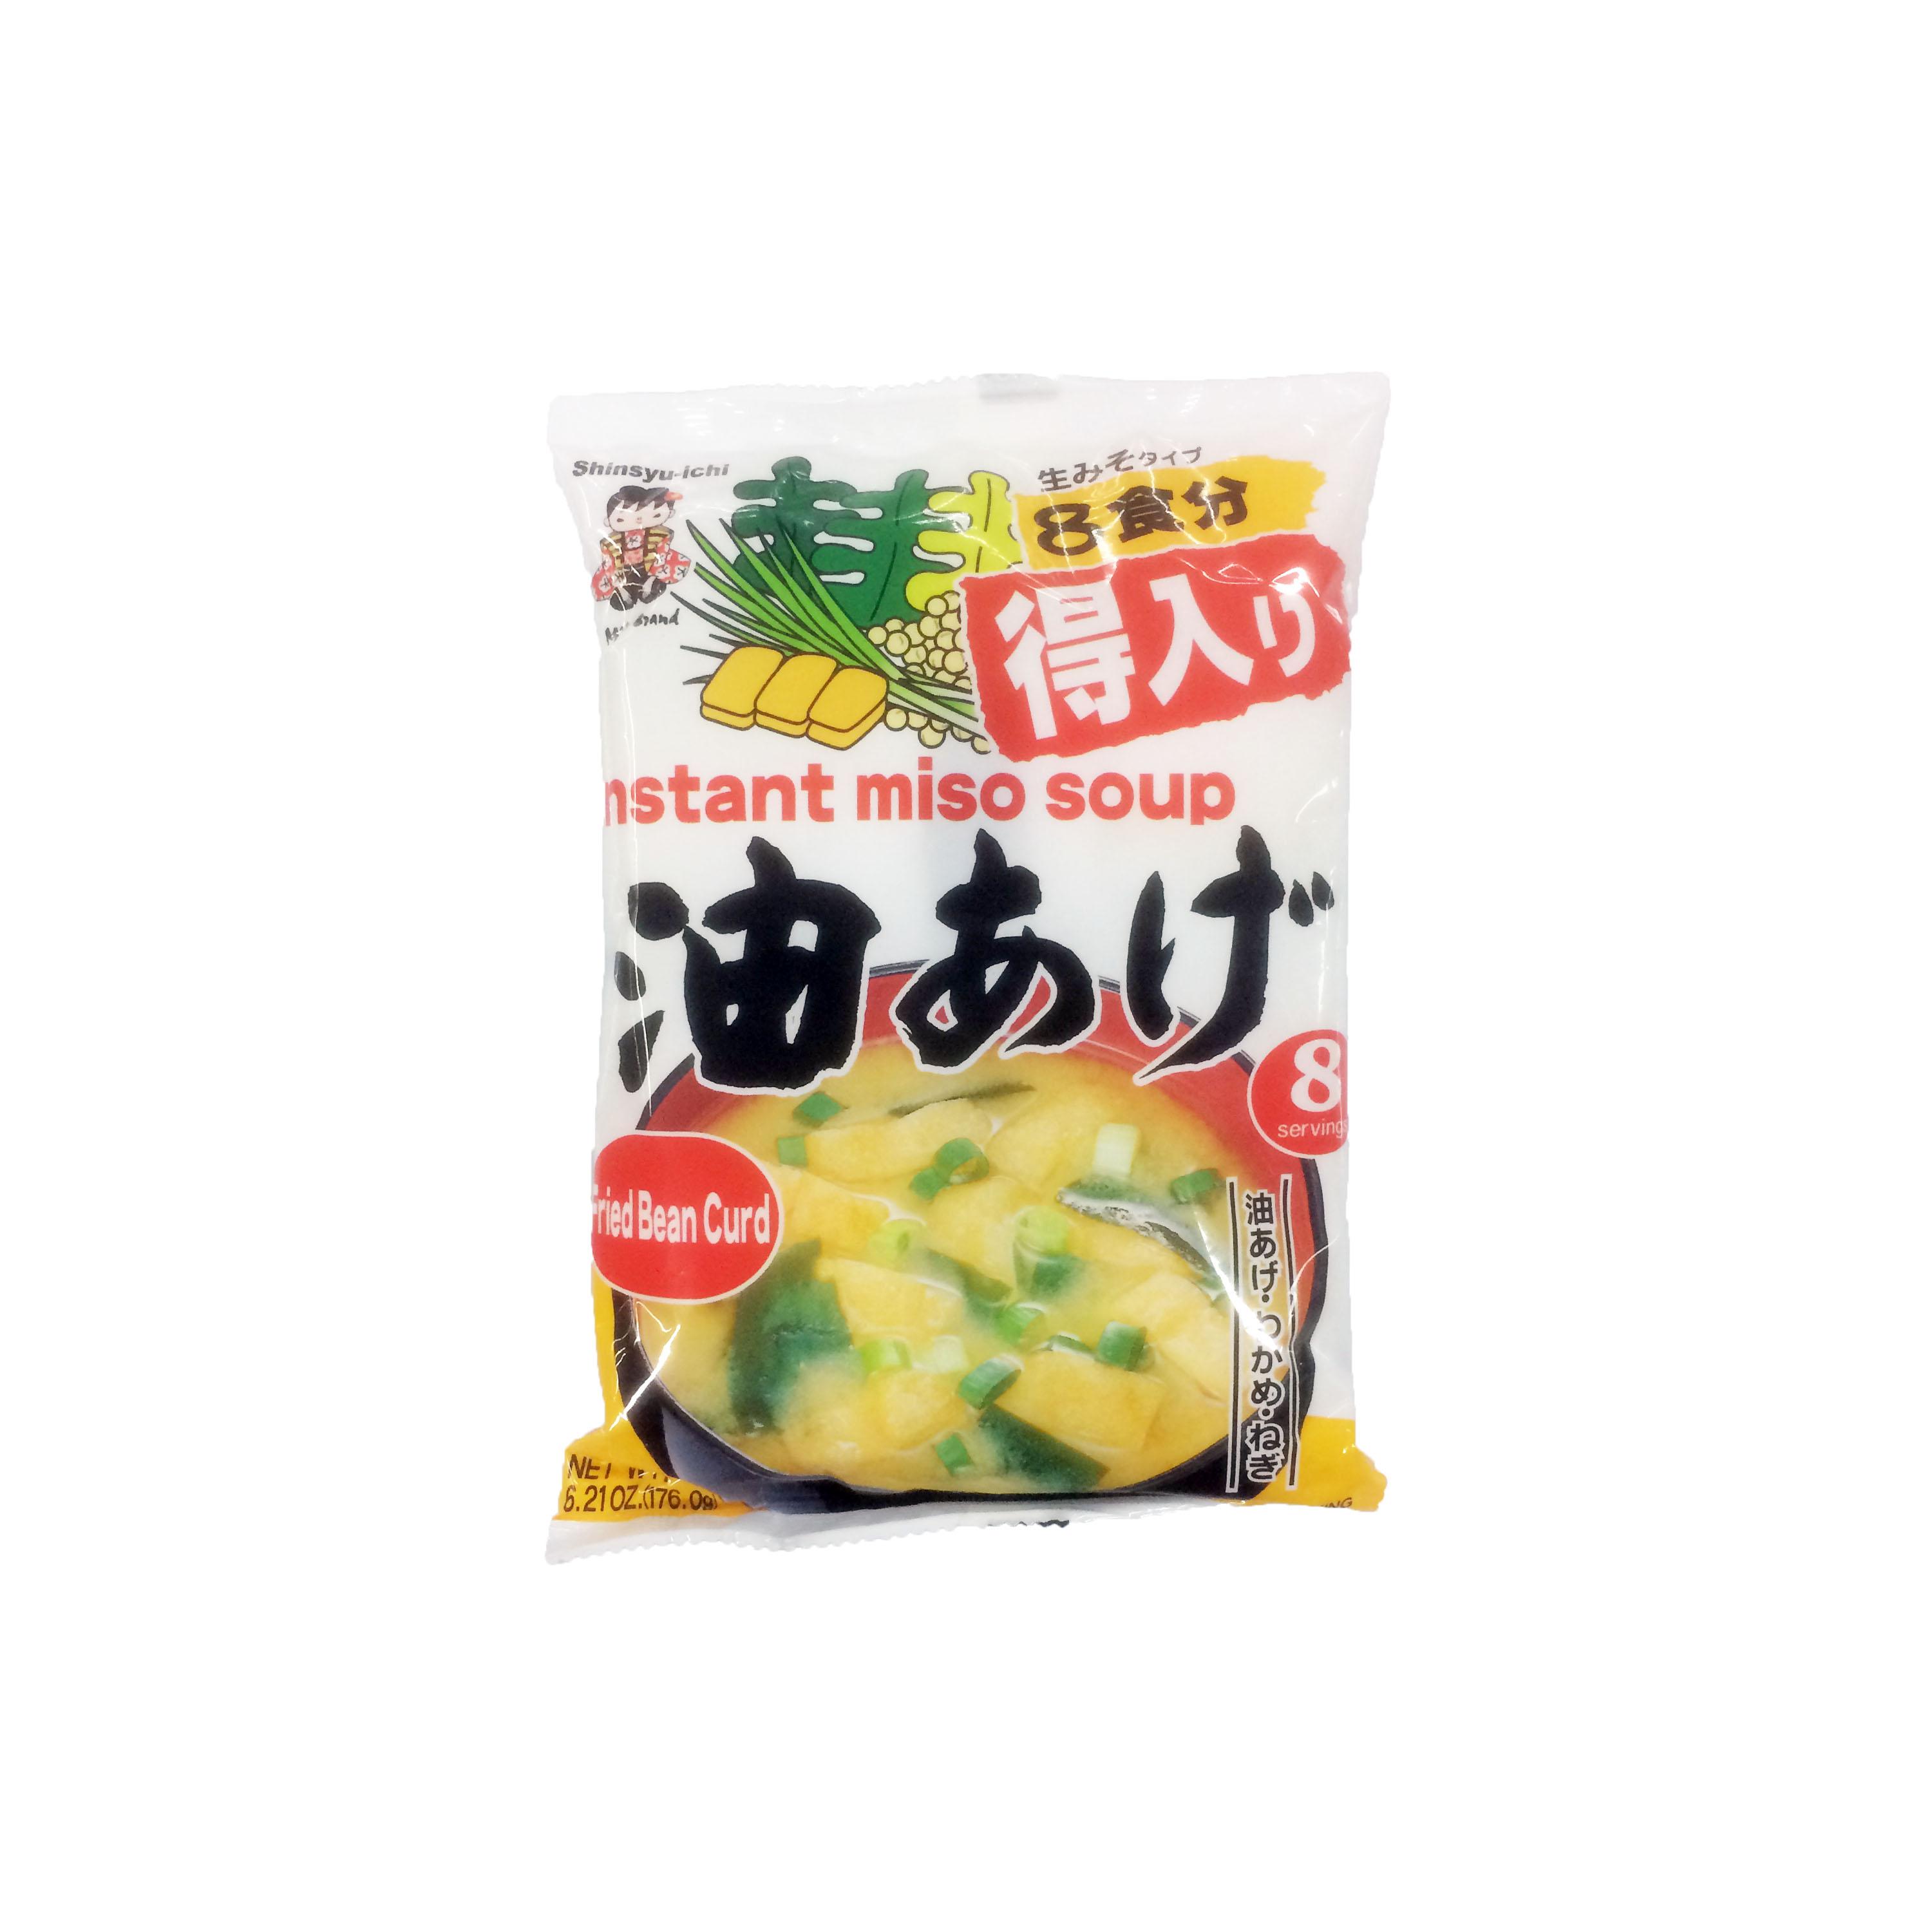 miko-instant-miso-soup-fried-bean-curd-seasoning-bag